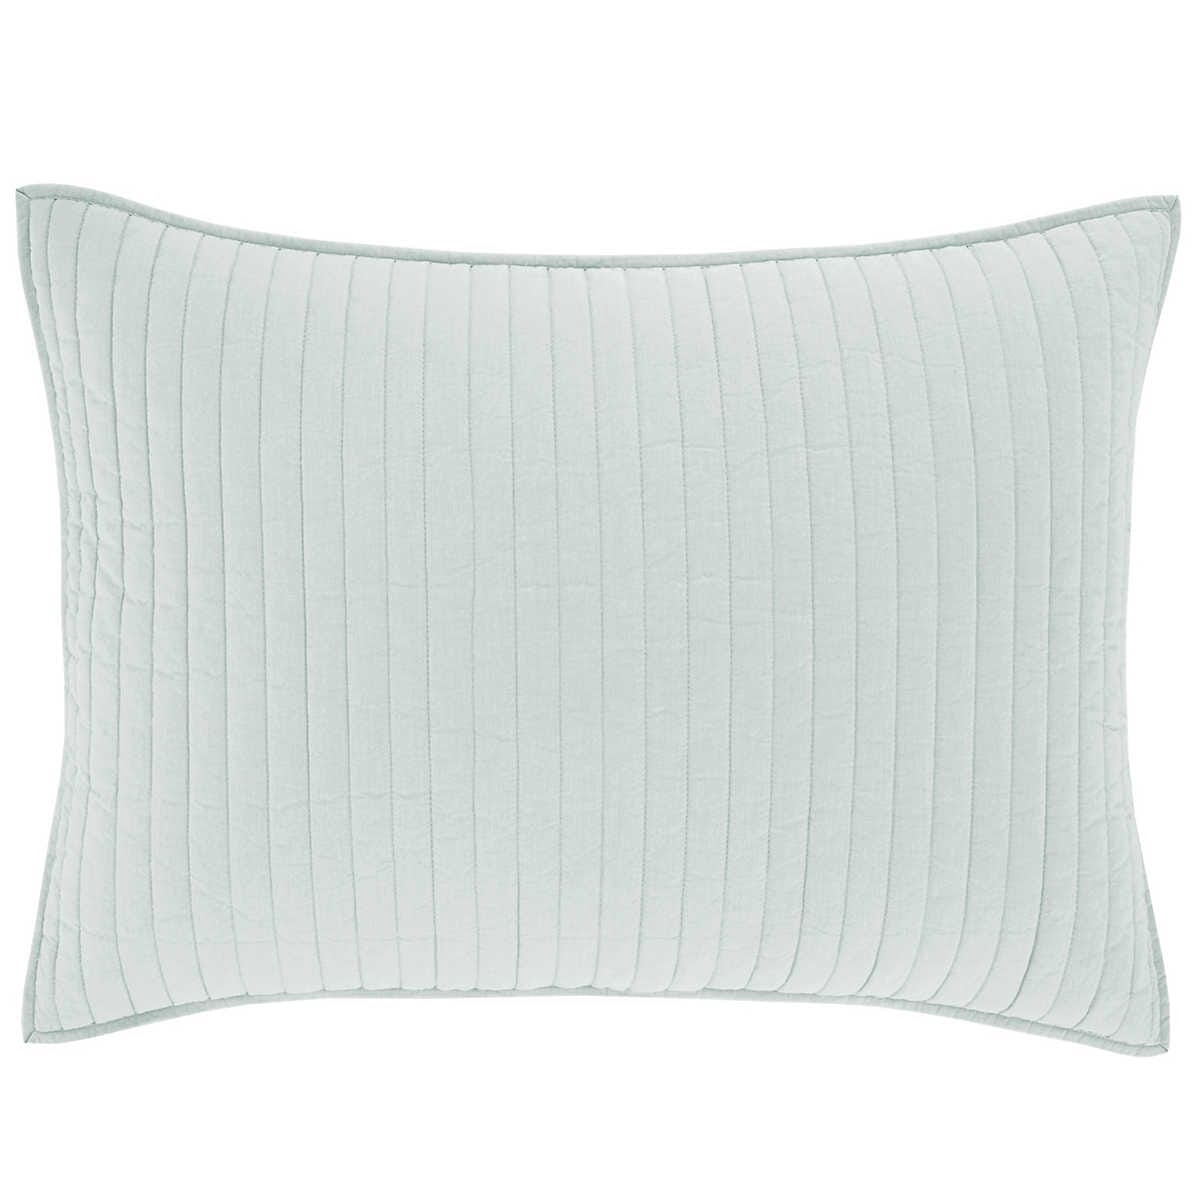 Cozy Cotton Sky Quilted Sham Pillowcases & Shams 